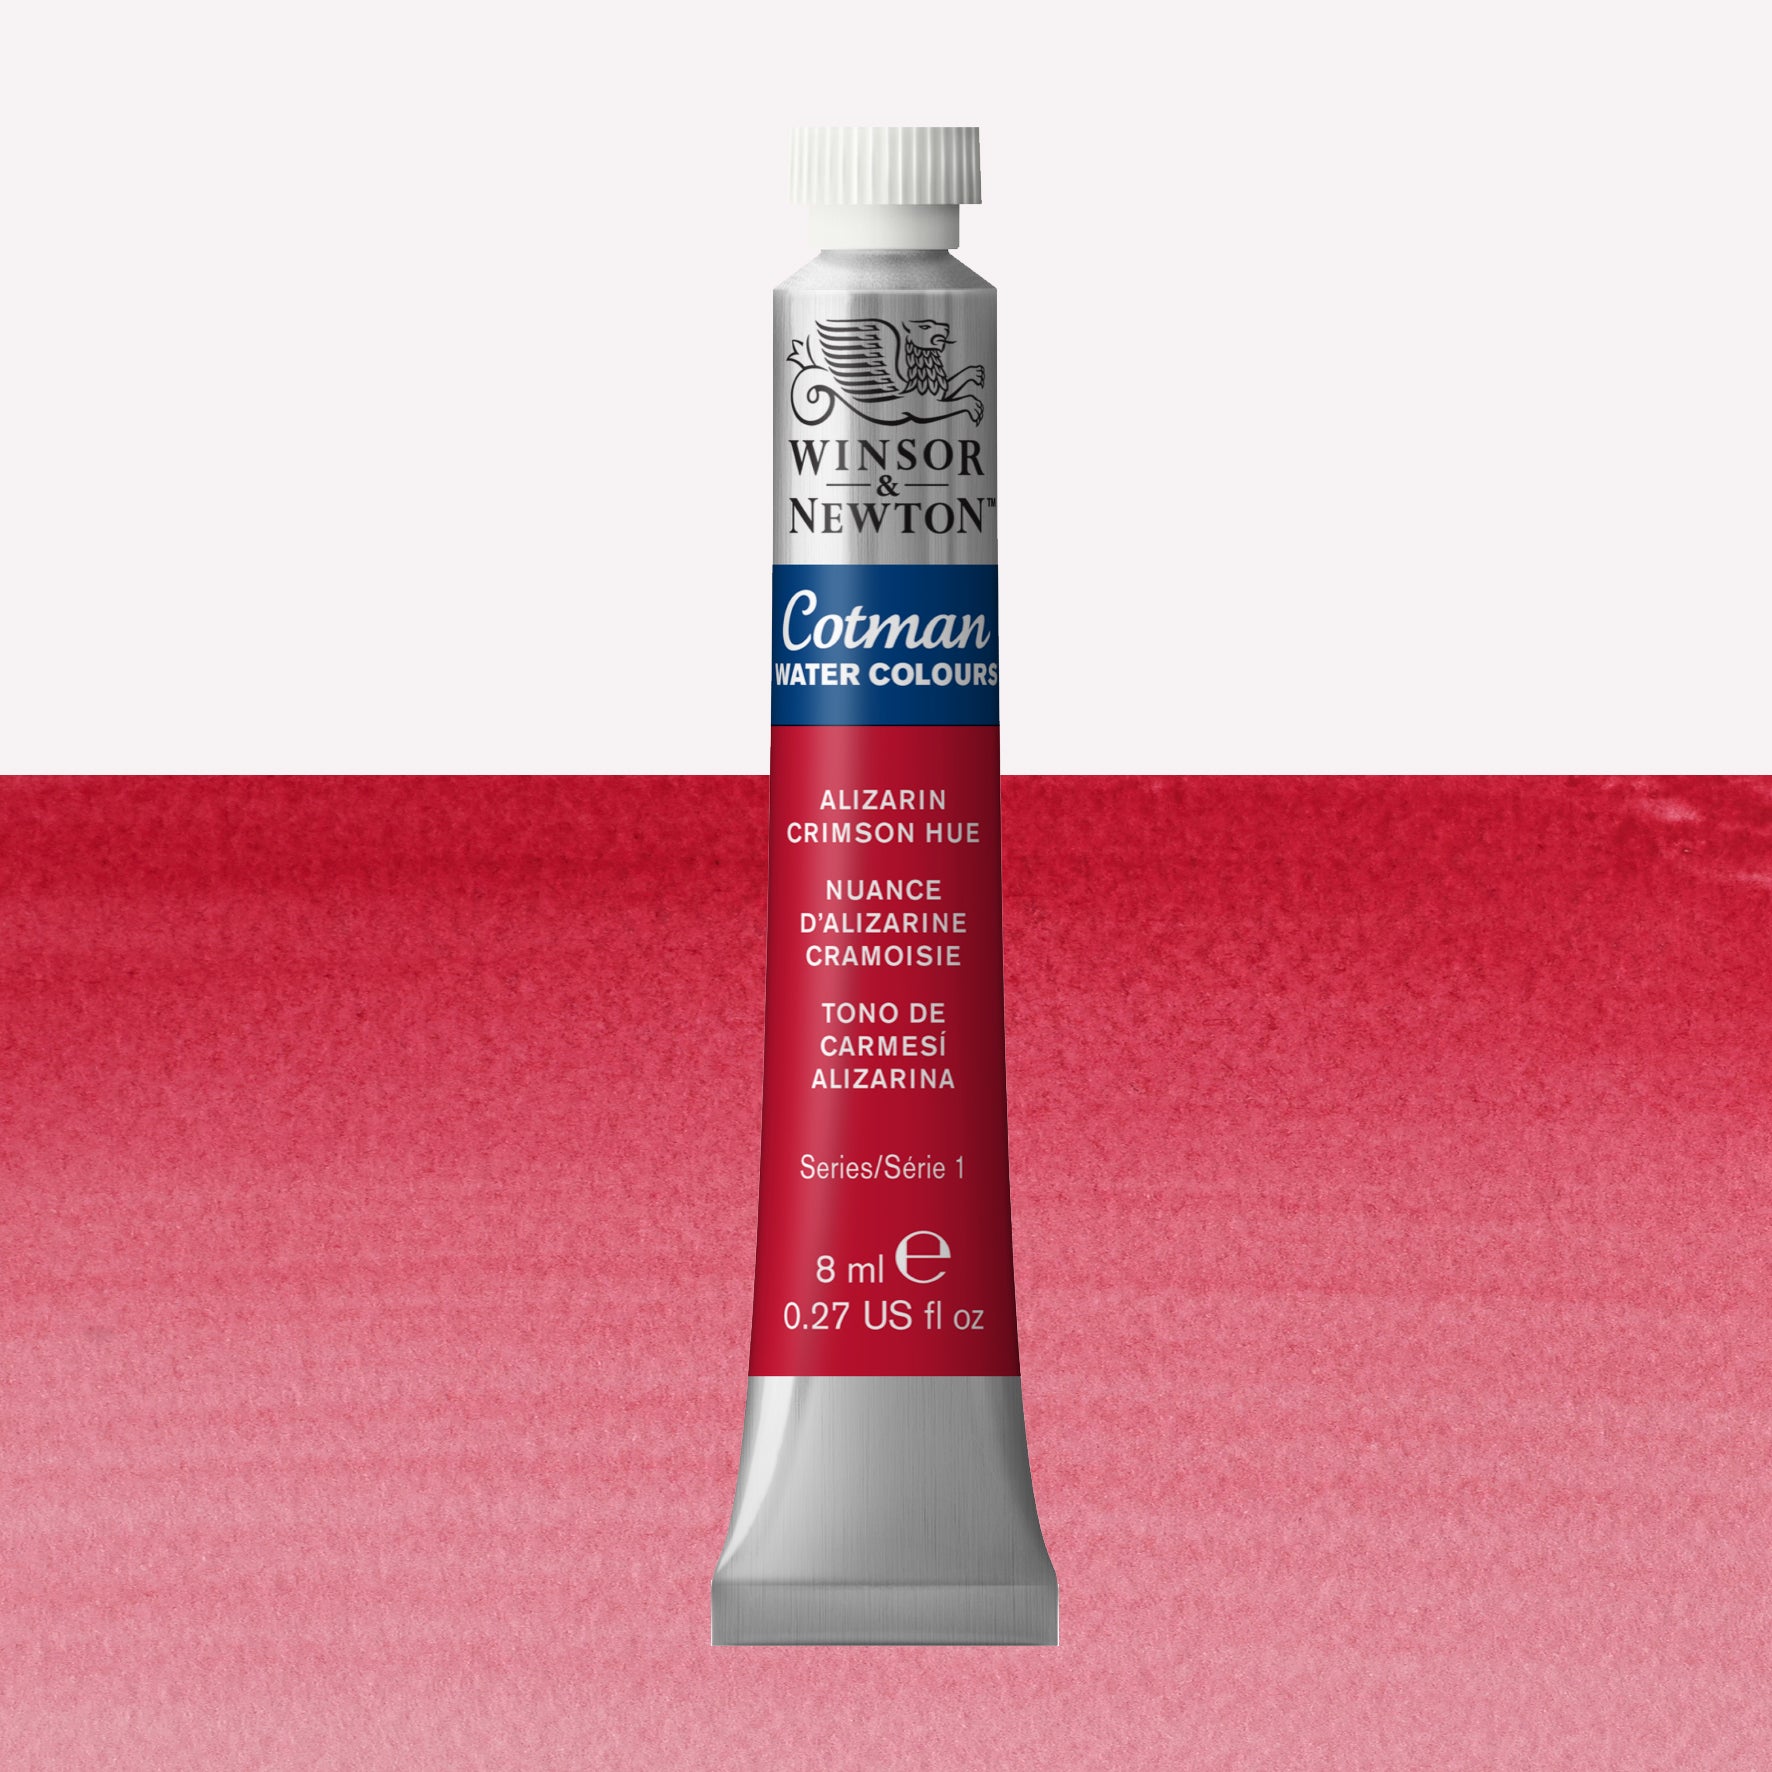 Winsor & Newton Cotman watercolour paint packaged in 8ml silver tubes with a white lid in the shade Alizarin Crimson Hue over a highly pigmented colour swatch.